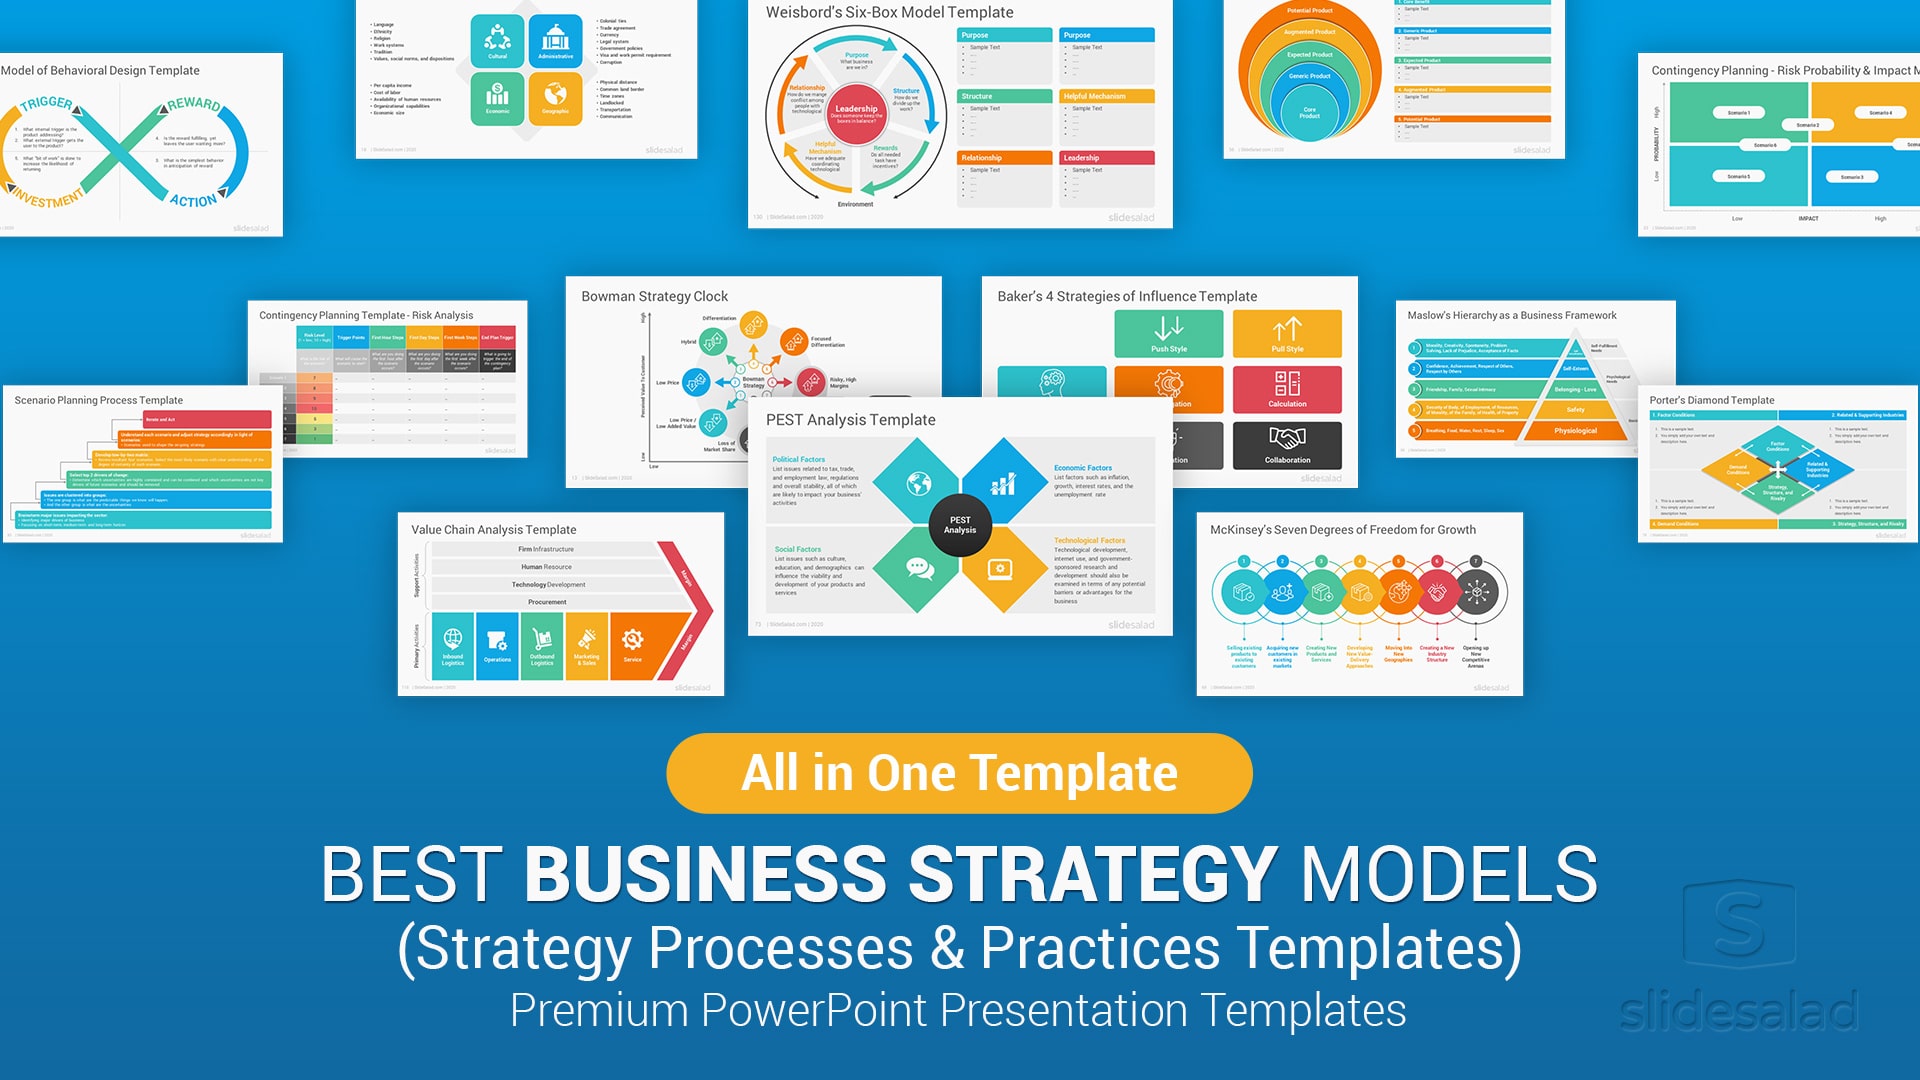 Best Business Strategy Models and Practices PowerPoint Templates - Best Proposal PPT Templates